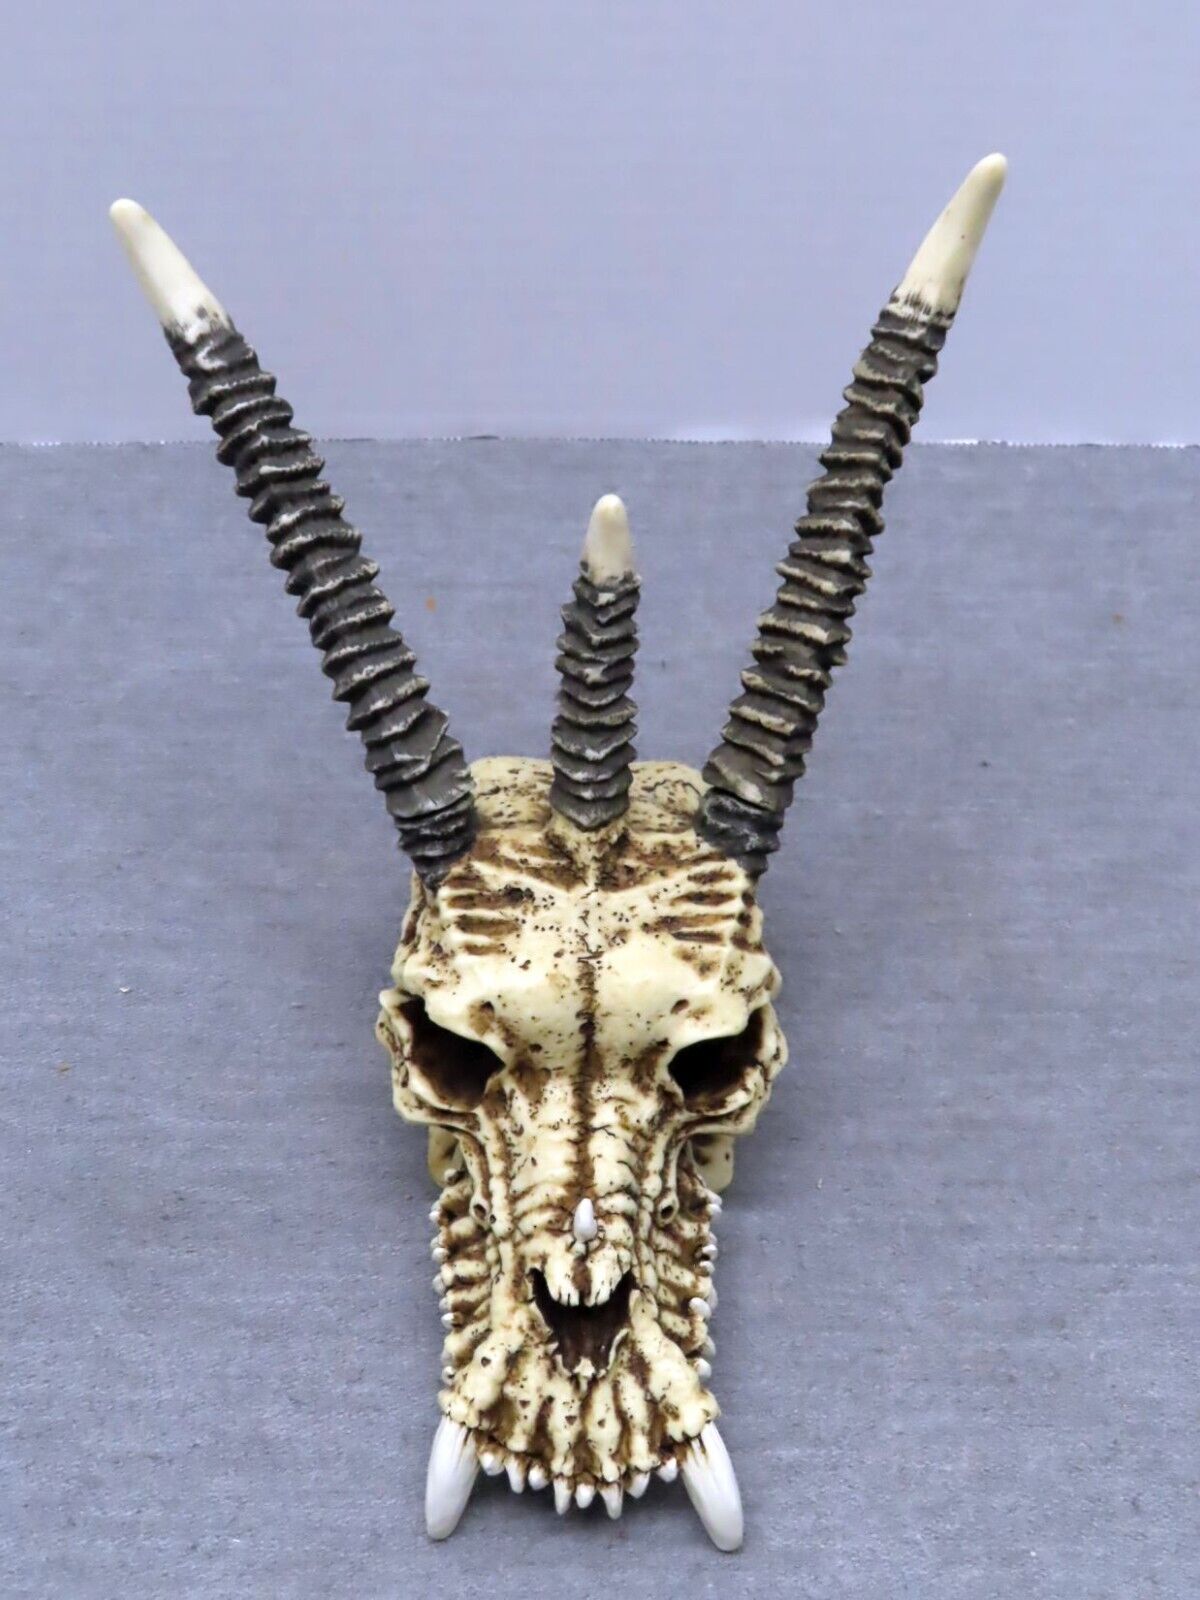 Summit Collection Small Mythical Fantasy Dragon Skull Resin Wall Mount Sculpture